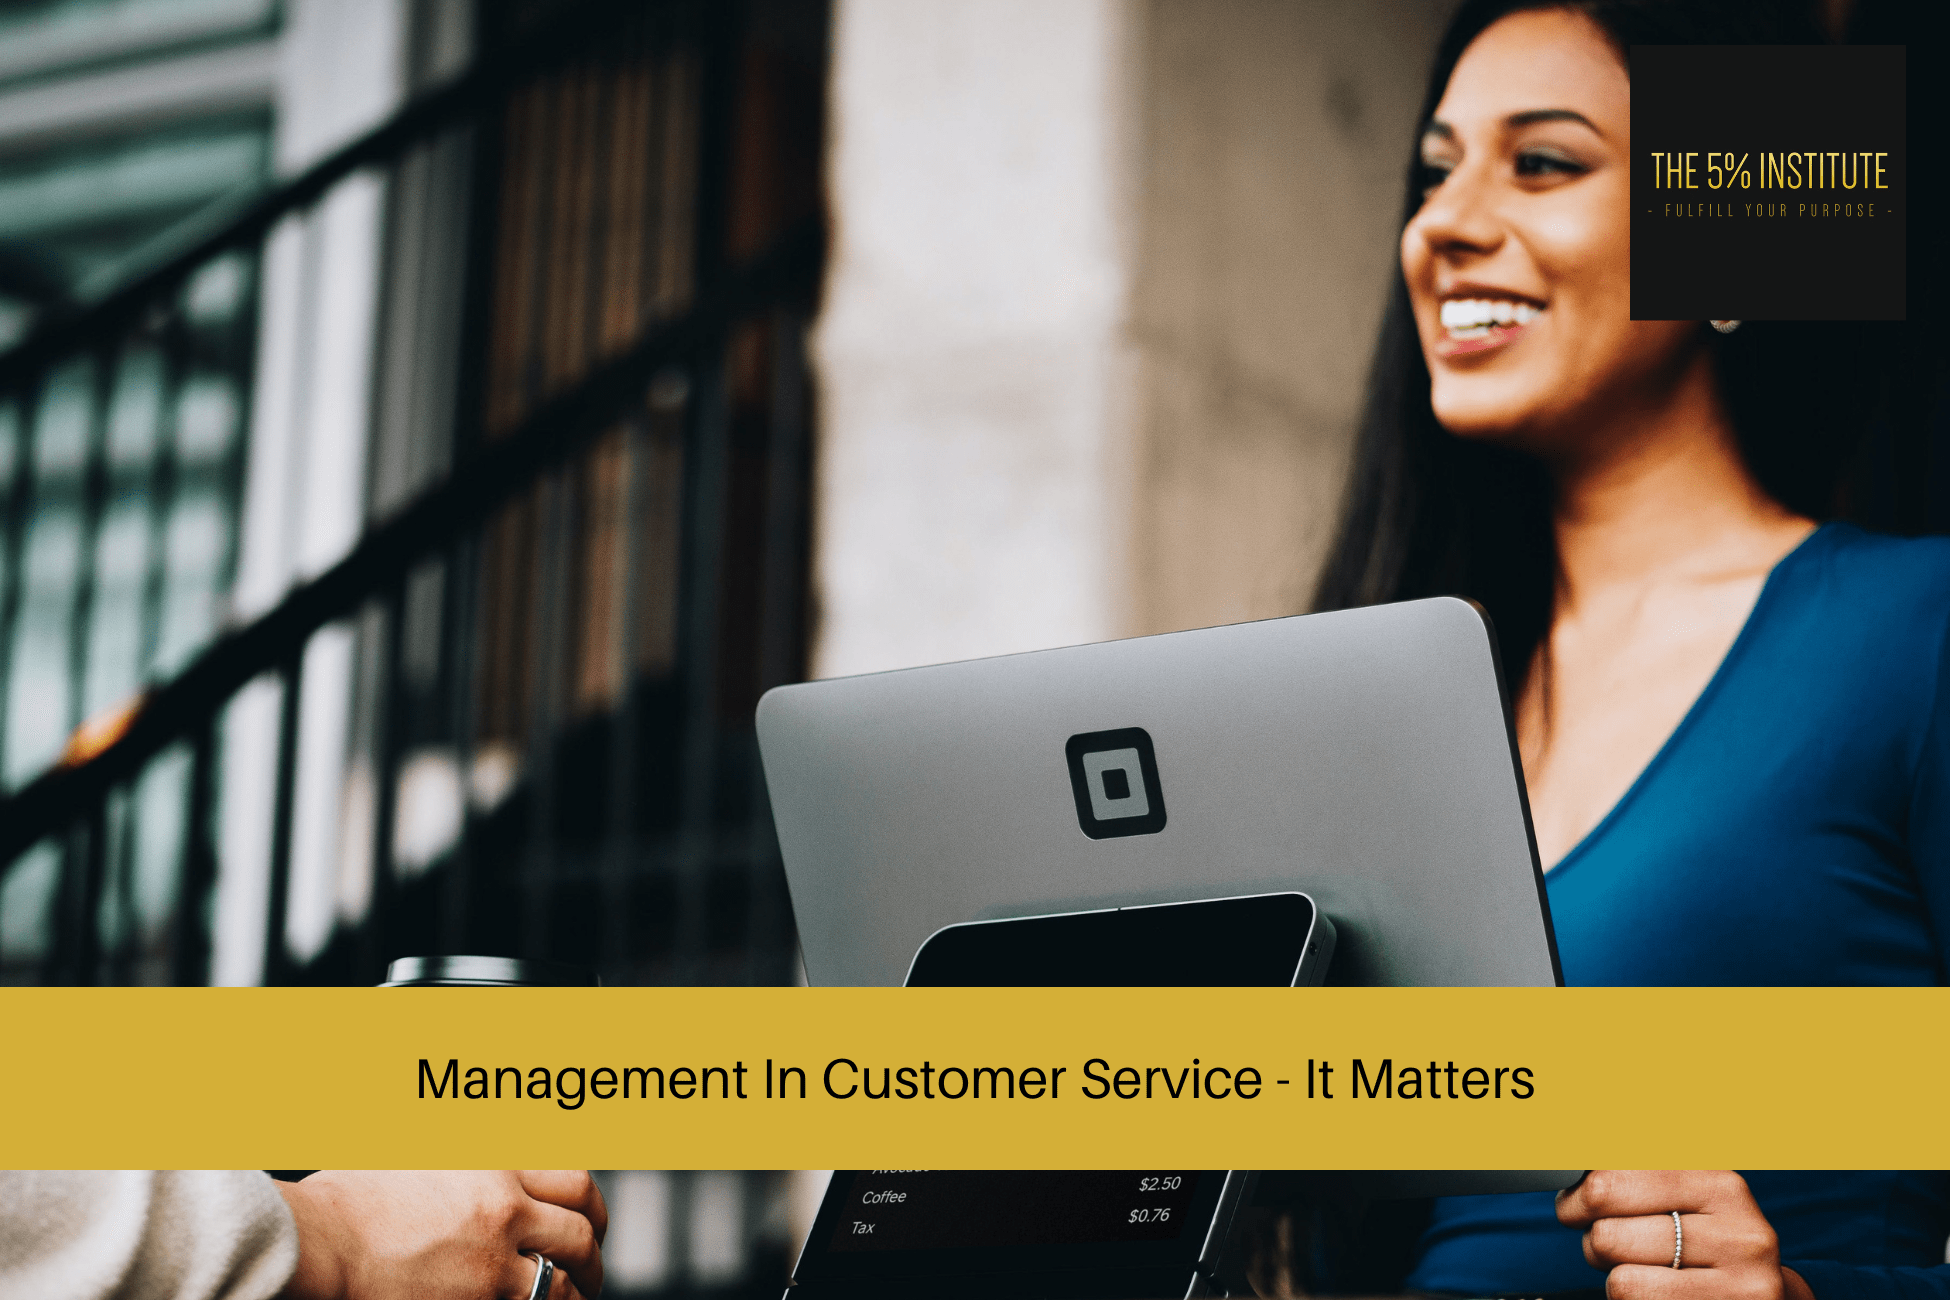 Management In Customer Service - It Matters